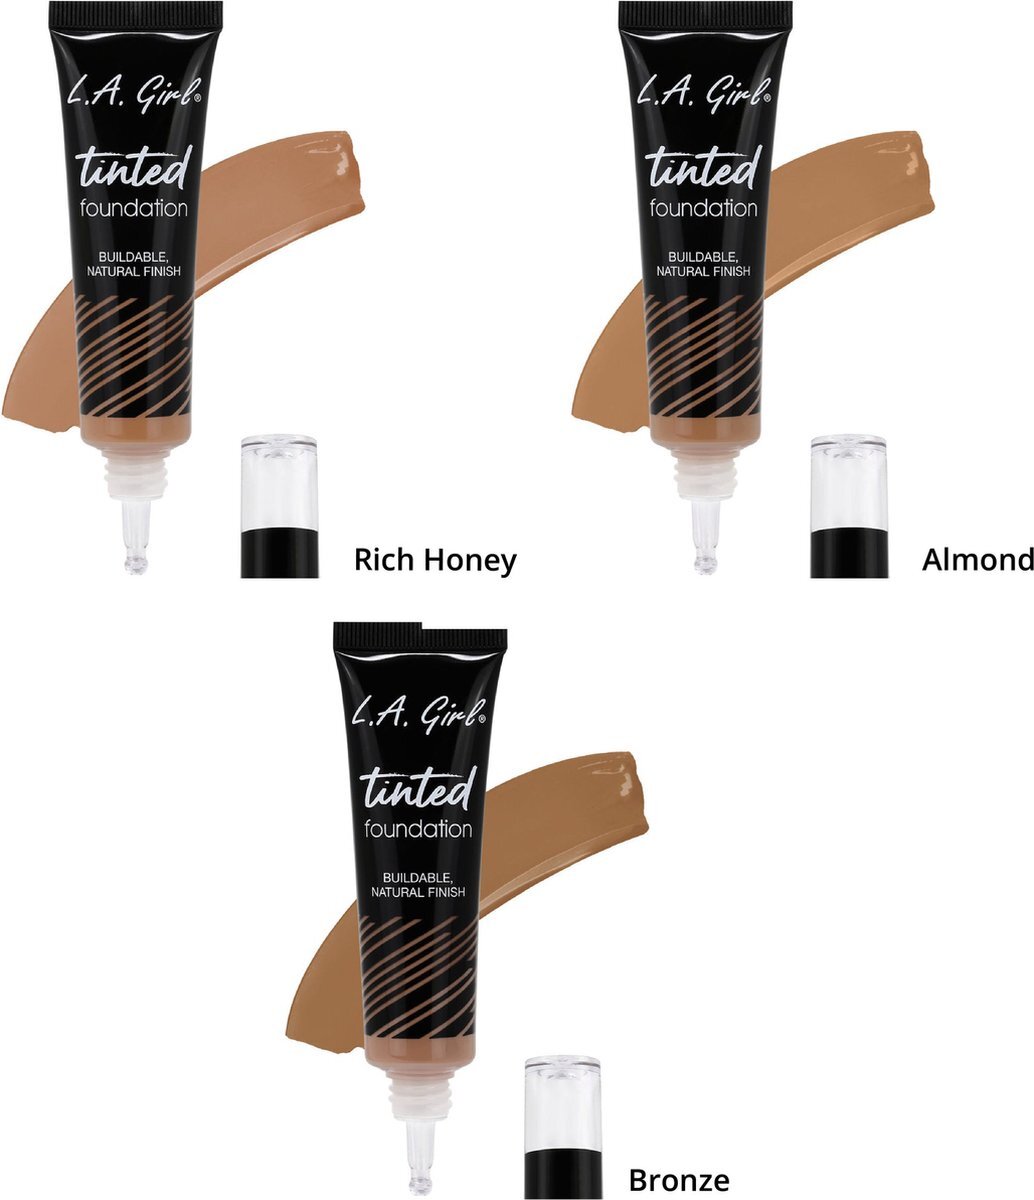 L.A. Girl - Tinted Foundation - Bronze